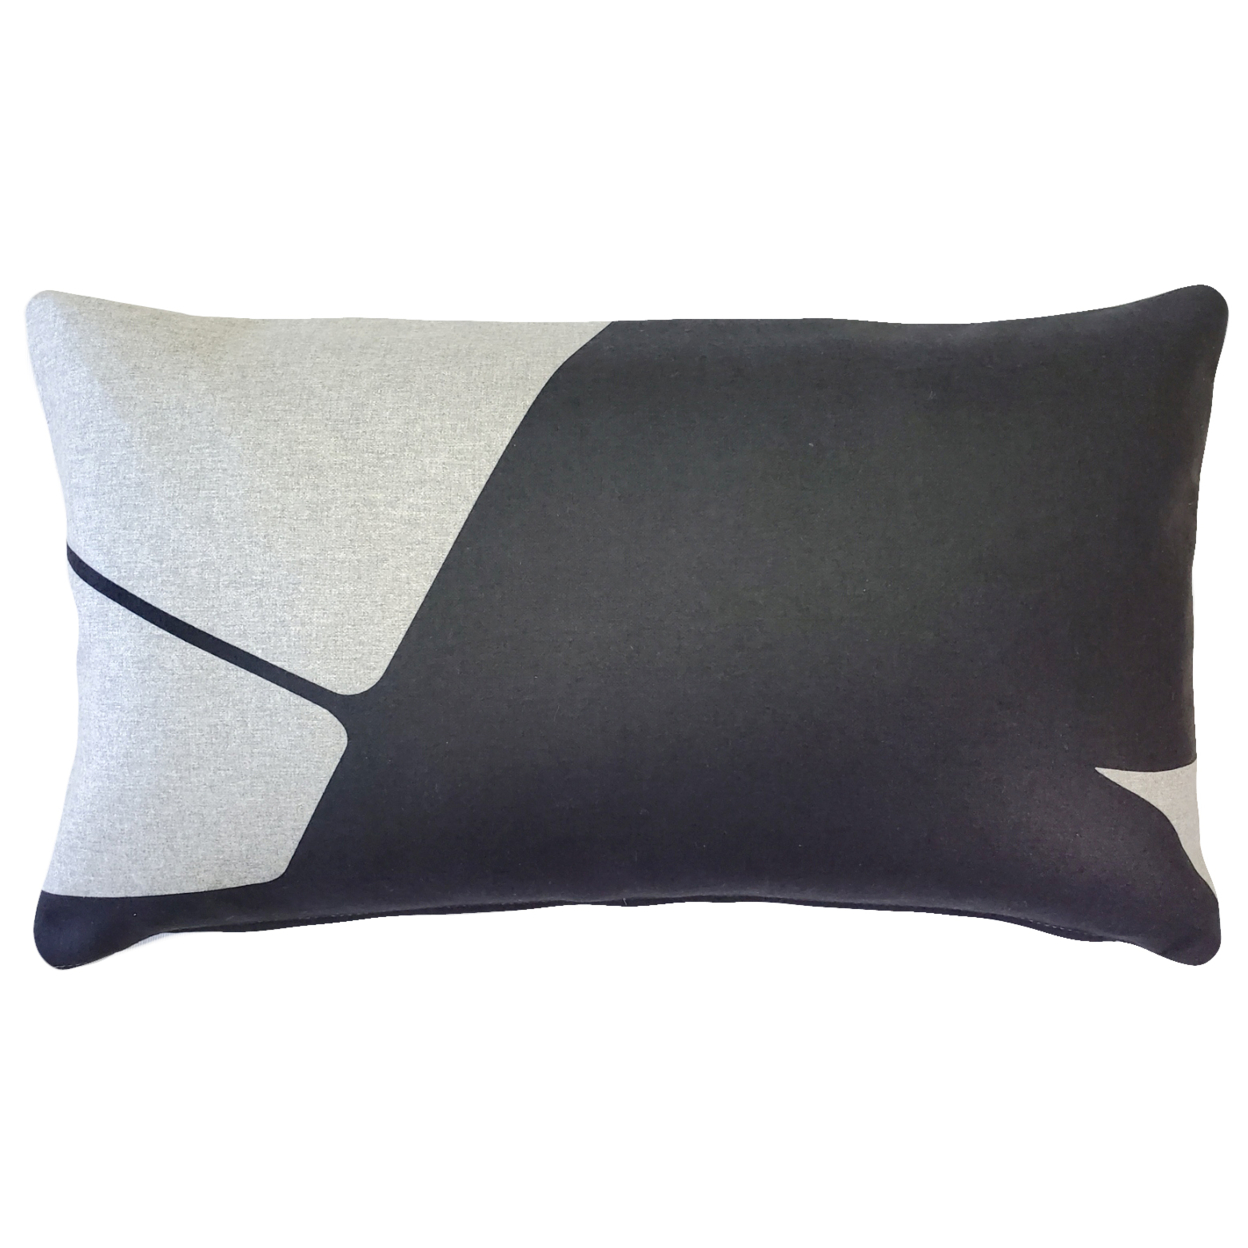 Boketto Charcoal Black Throw Pillow 12x19 Inches Square, Complete Pillow with Polyfill Pillow Insert